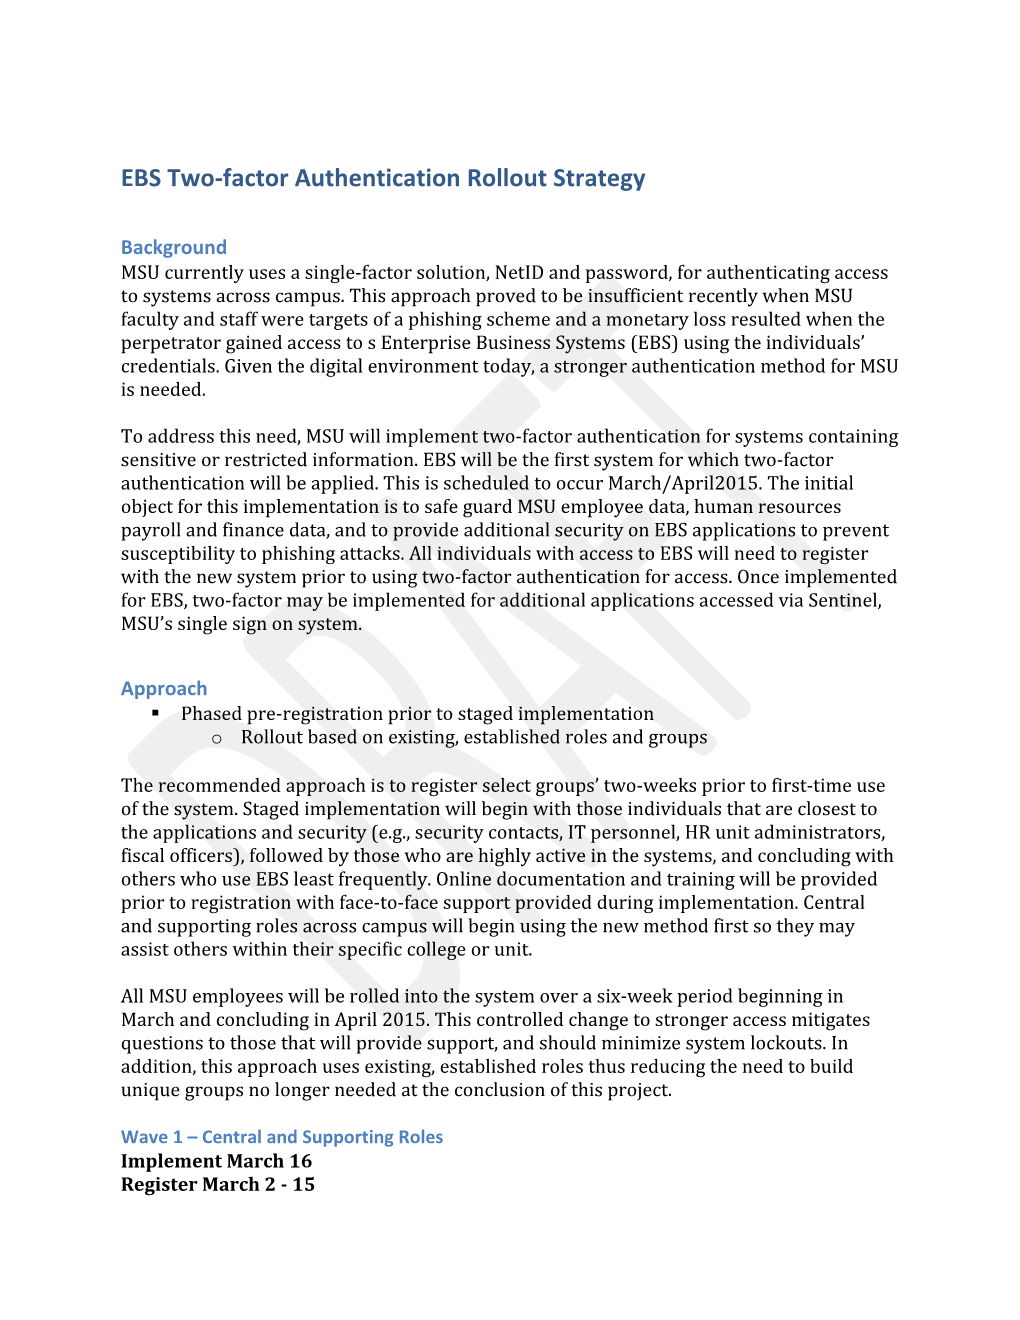 EBS Two-Factor Authentication Rollout Strategy